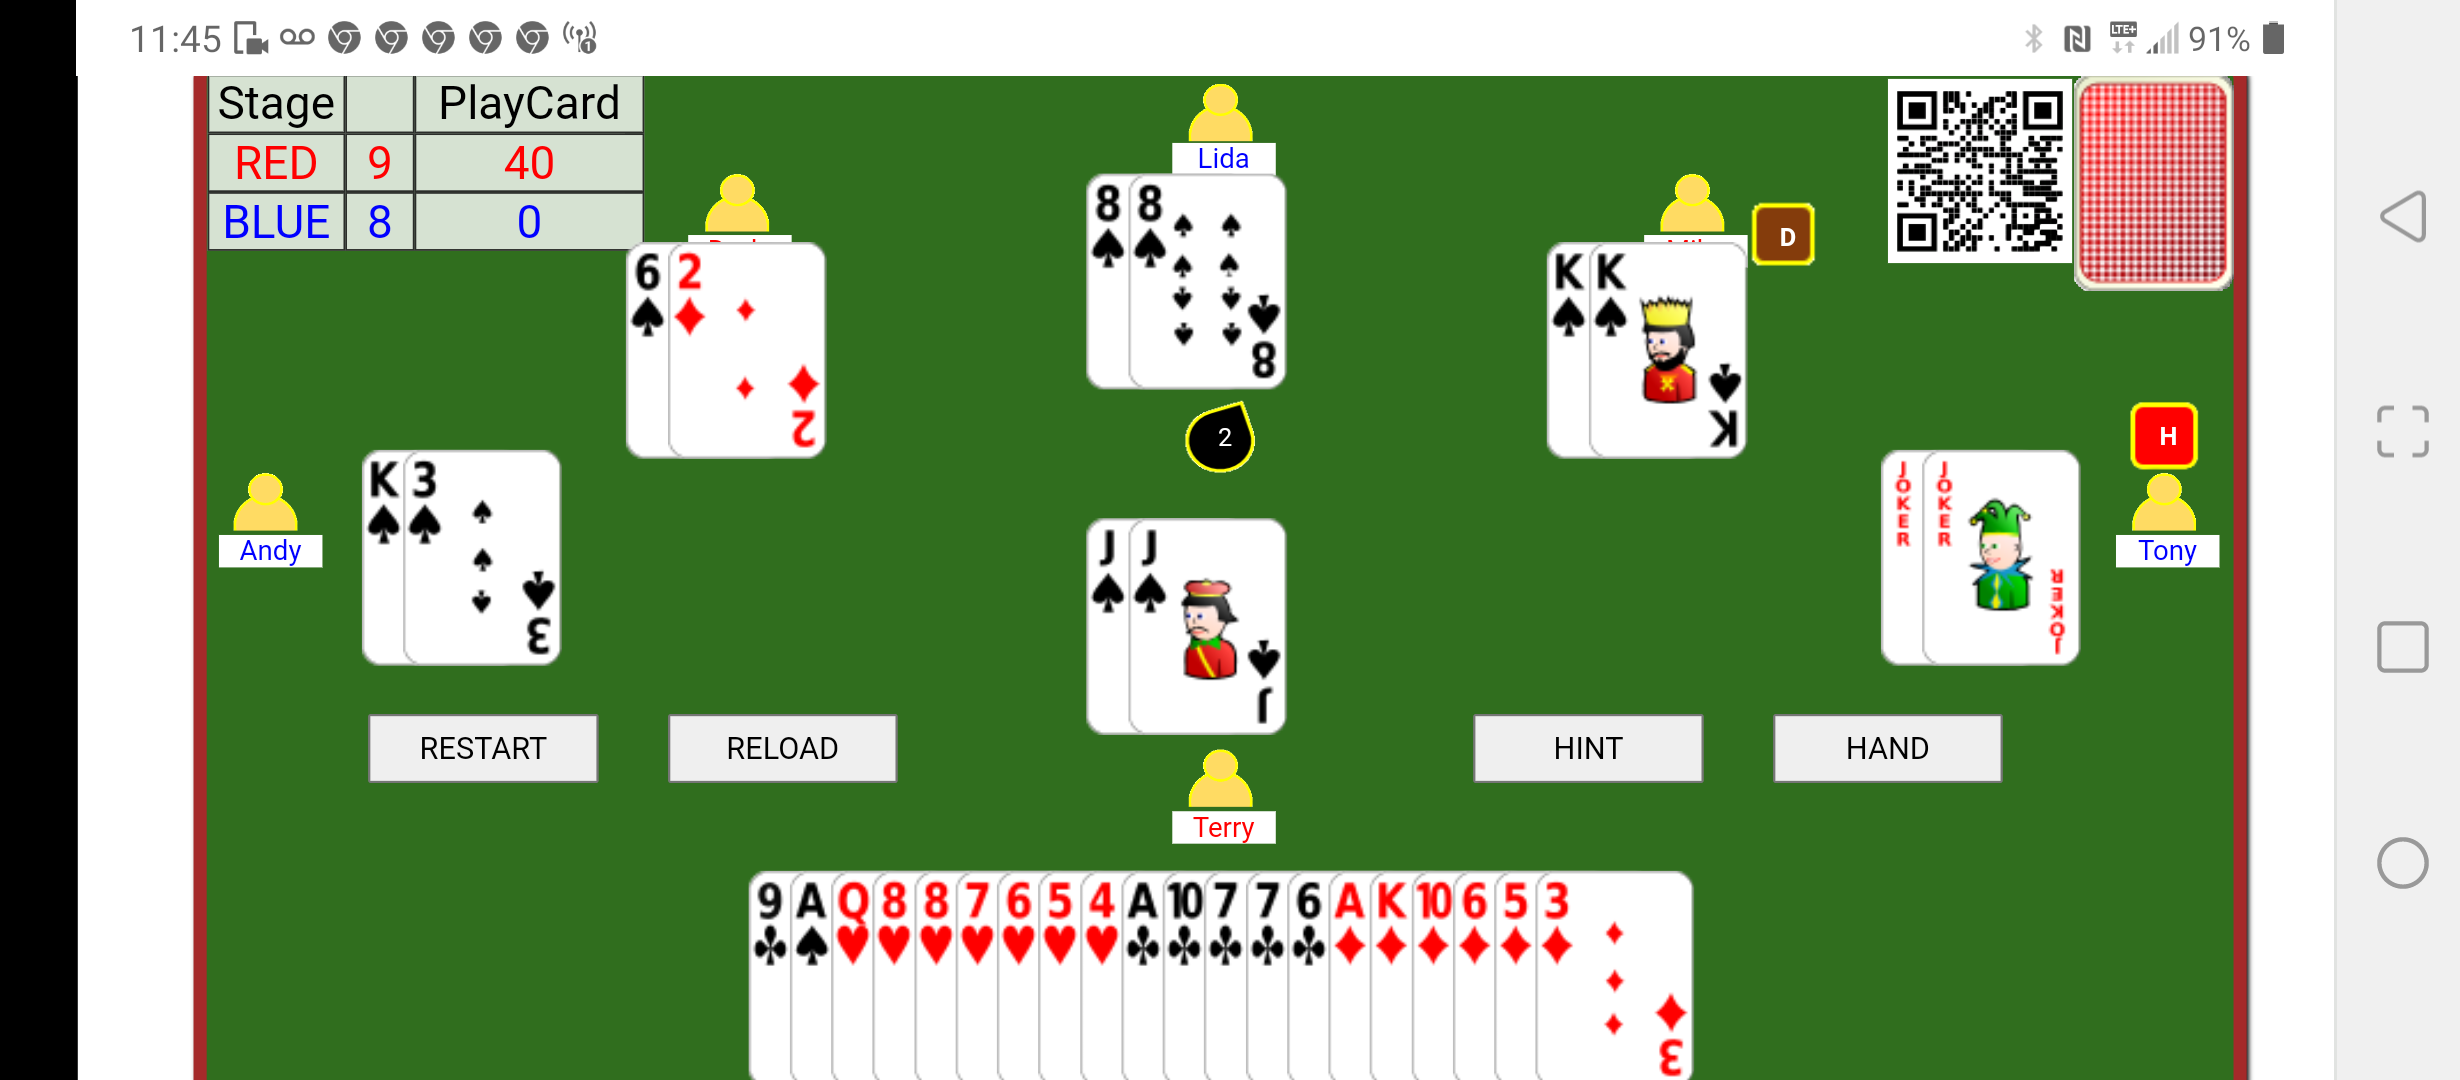 html5 tractor card game Screenshot_20220120-114526.png